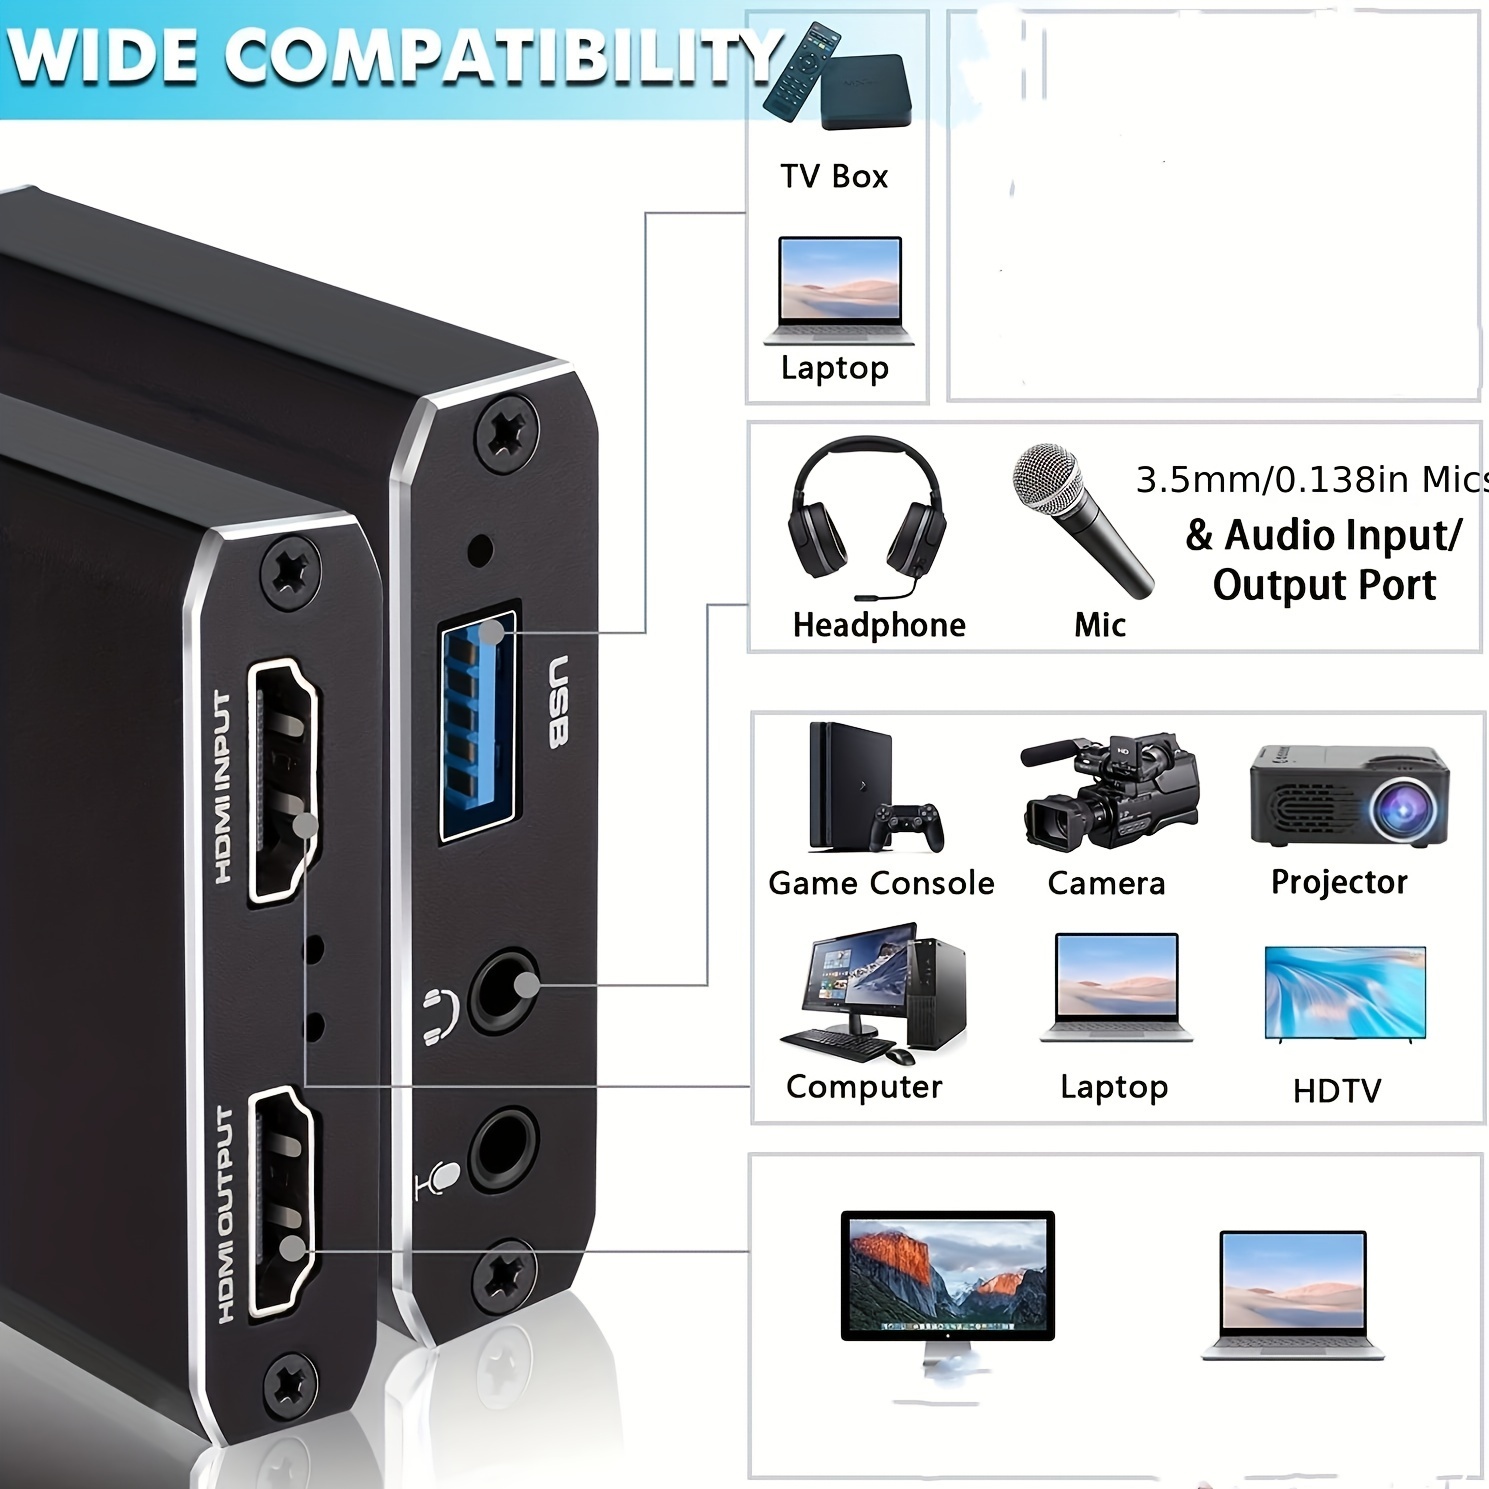 Video USB 3.0 HD Audio 4K 60FPS Game Real-Time Streaming Video Recorder  Capture Device 